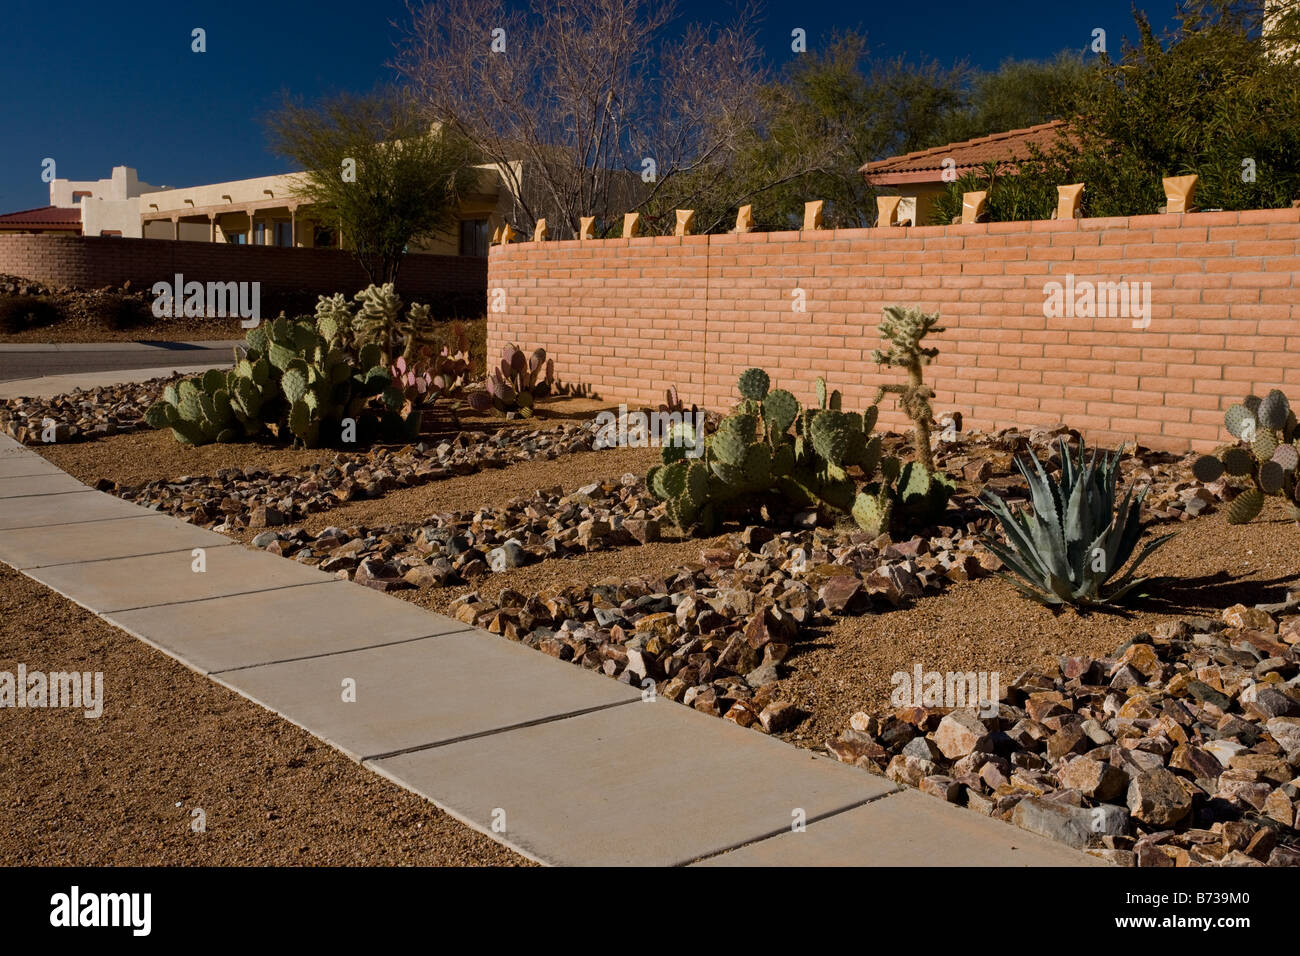 Desert Gardening Using Drought Resistant Species In A Low Rainfall